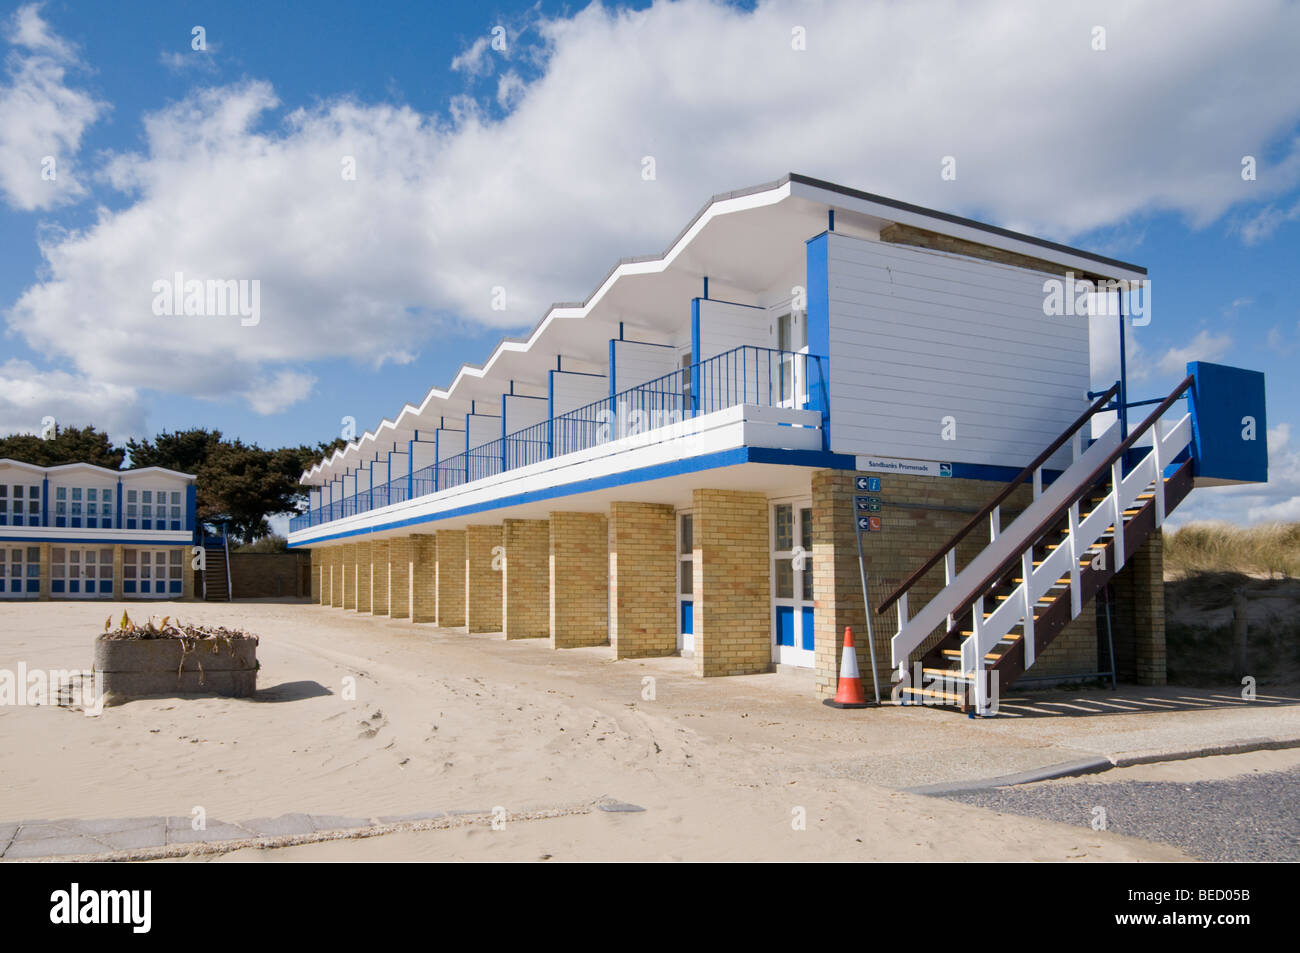 2 storey  Beach chalets at Sandbanks, south coast of England after a winter storm with sand blown onto the courtyard. Stock Photo